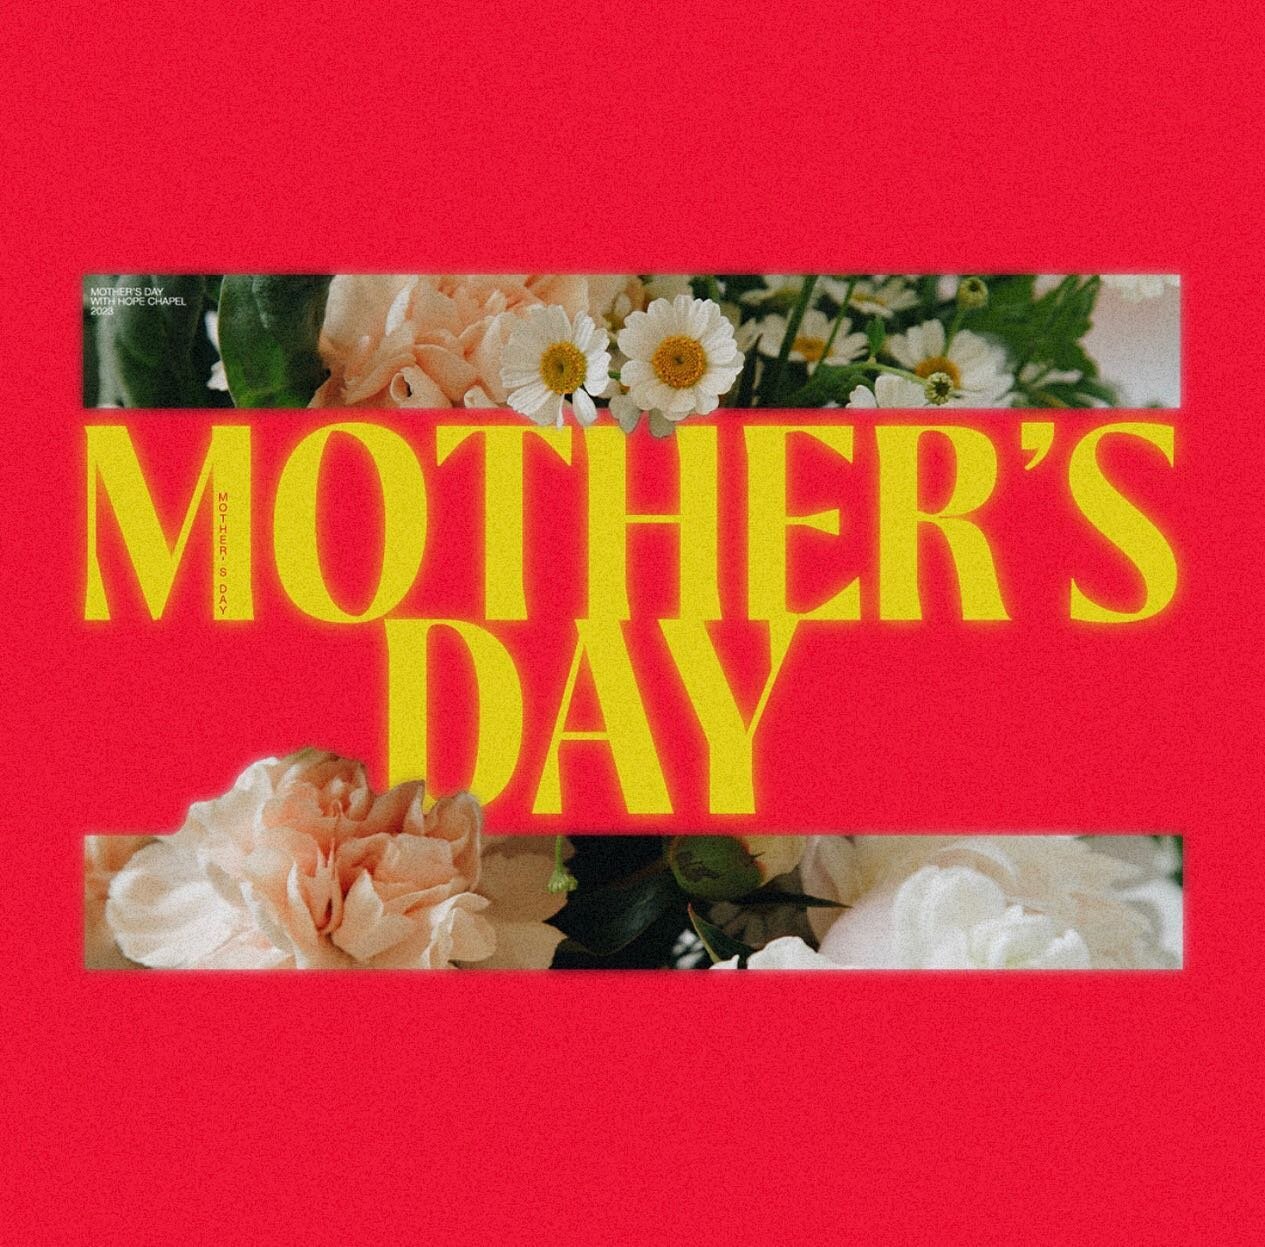 Happy Mother&rsquo;s Day to all the hard-working, always-loving, encouragement-giving moms out there!

For some of you, today is a joyous day of celebration with your own mom or kids! Yet today is also a day marked by grief for many who have lost the